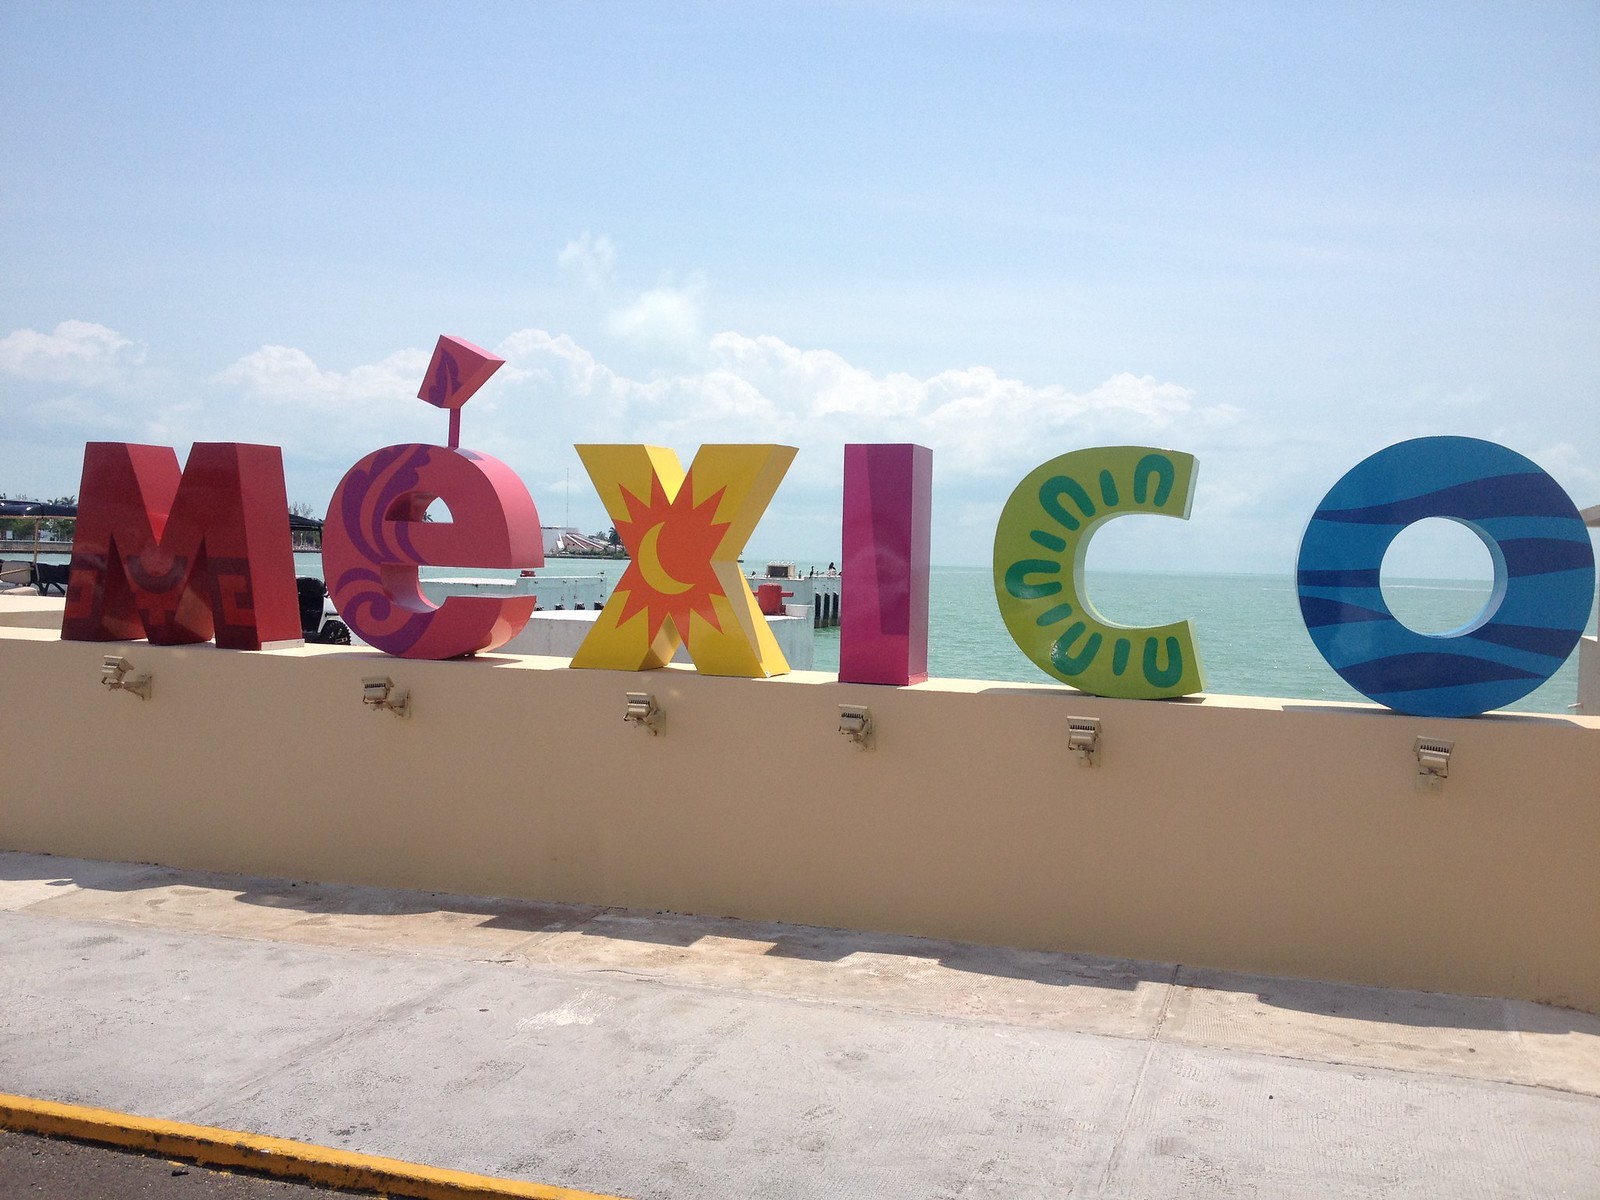 Image of sign saying "Mexico" along a beach